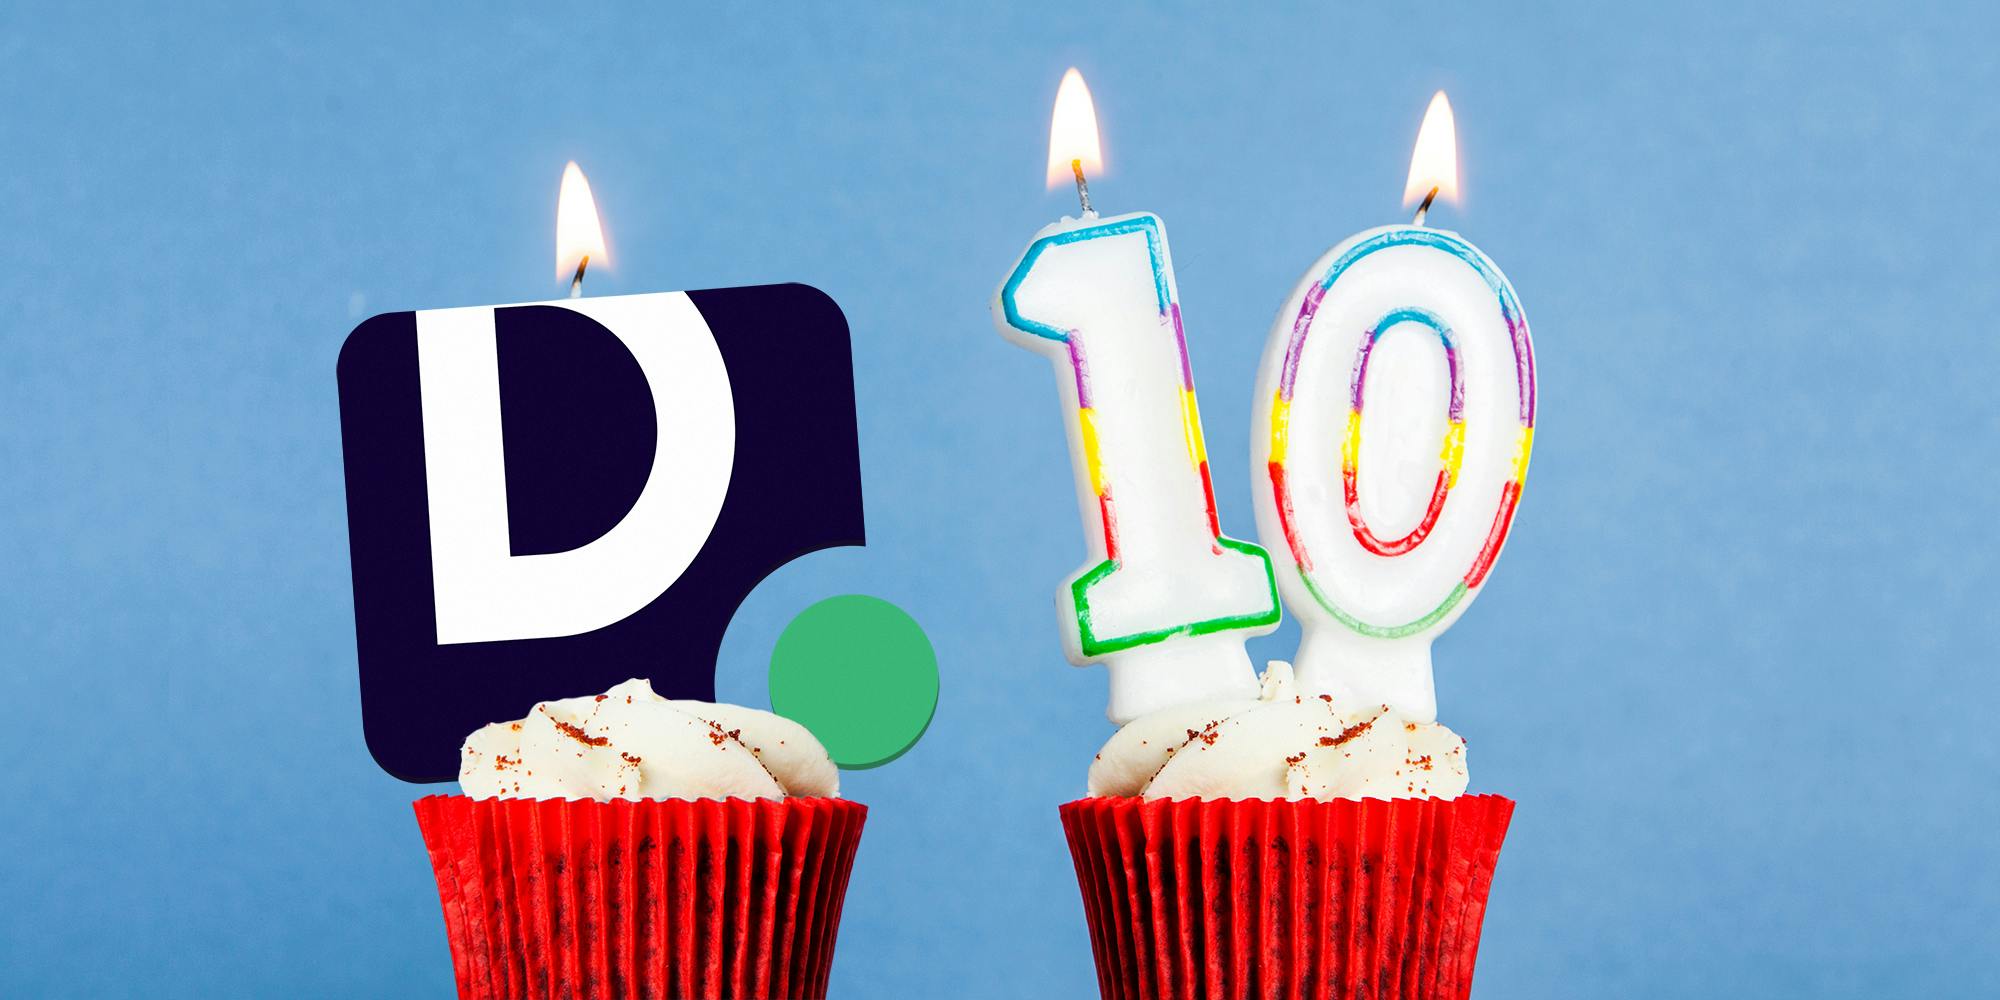 Daily Dot logo candle and Number 10 birthday candle in cupcakes against a blue background